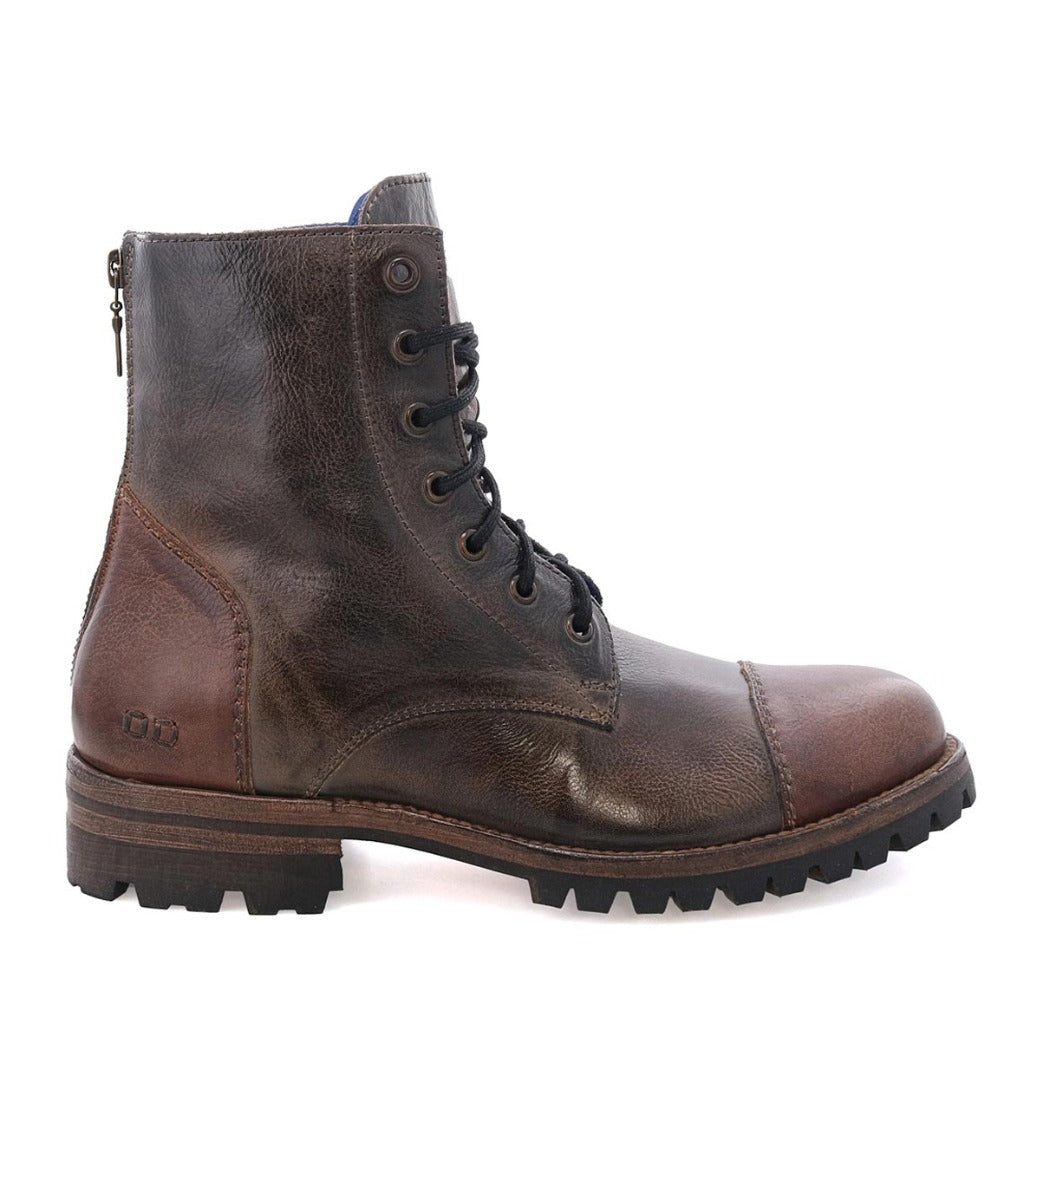 Brown leather lace-up combat style boot with a side zipper and rugged sole, isolated on a white background is the Protege Trek by Bed Stu.